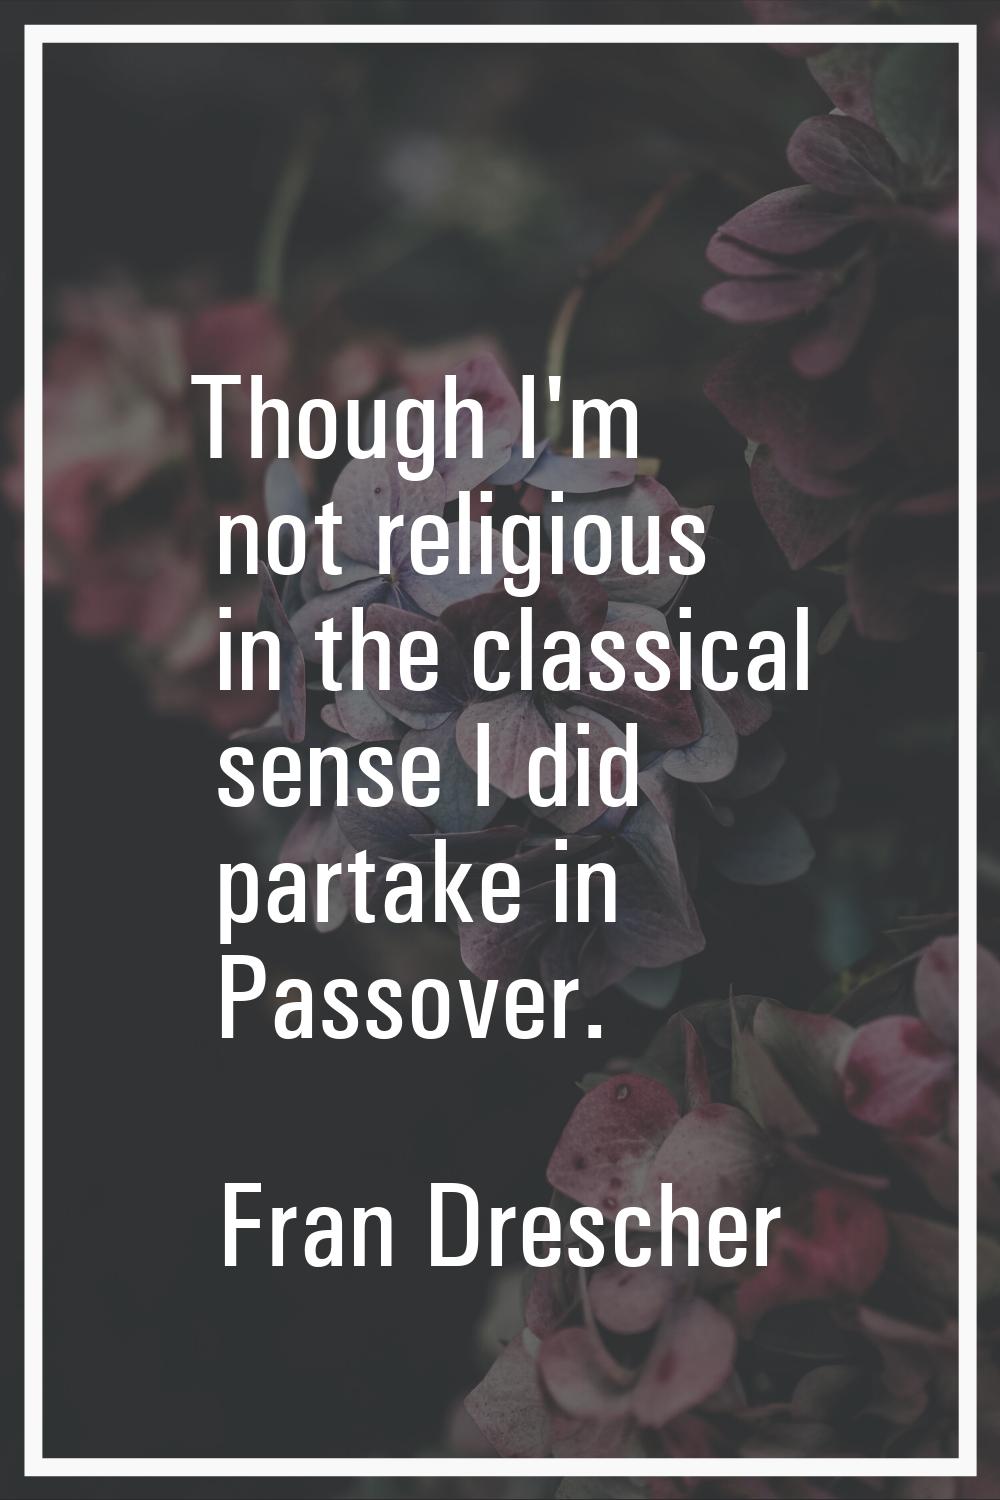 Though I'm not religious in the classical sense I did partake in Passover.